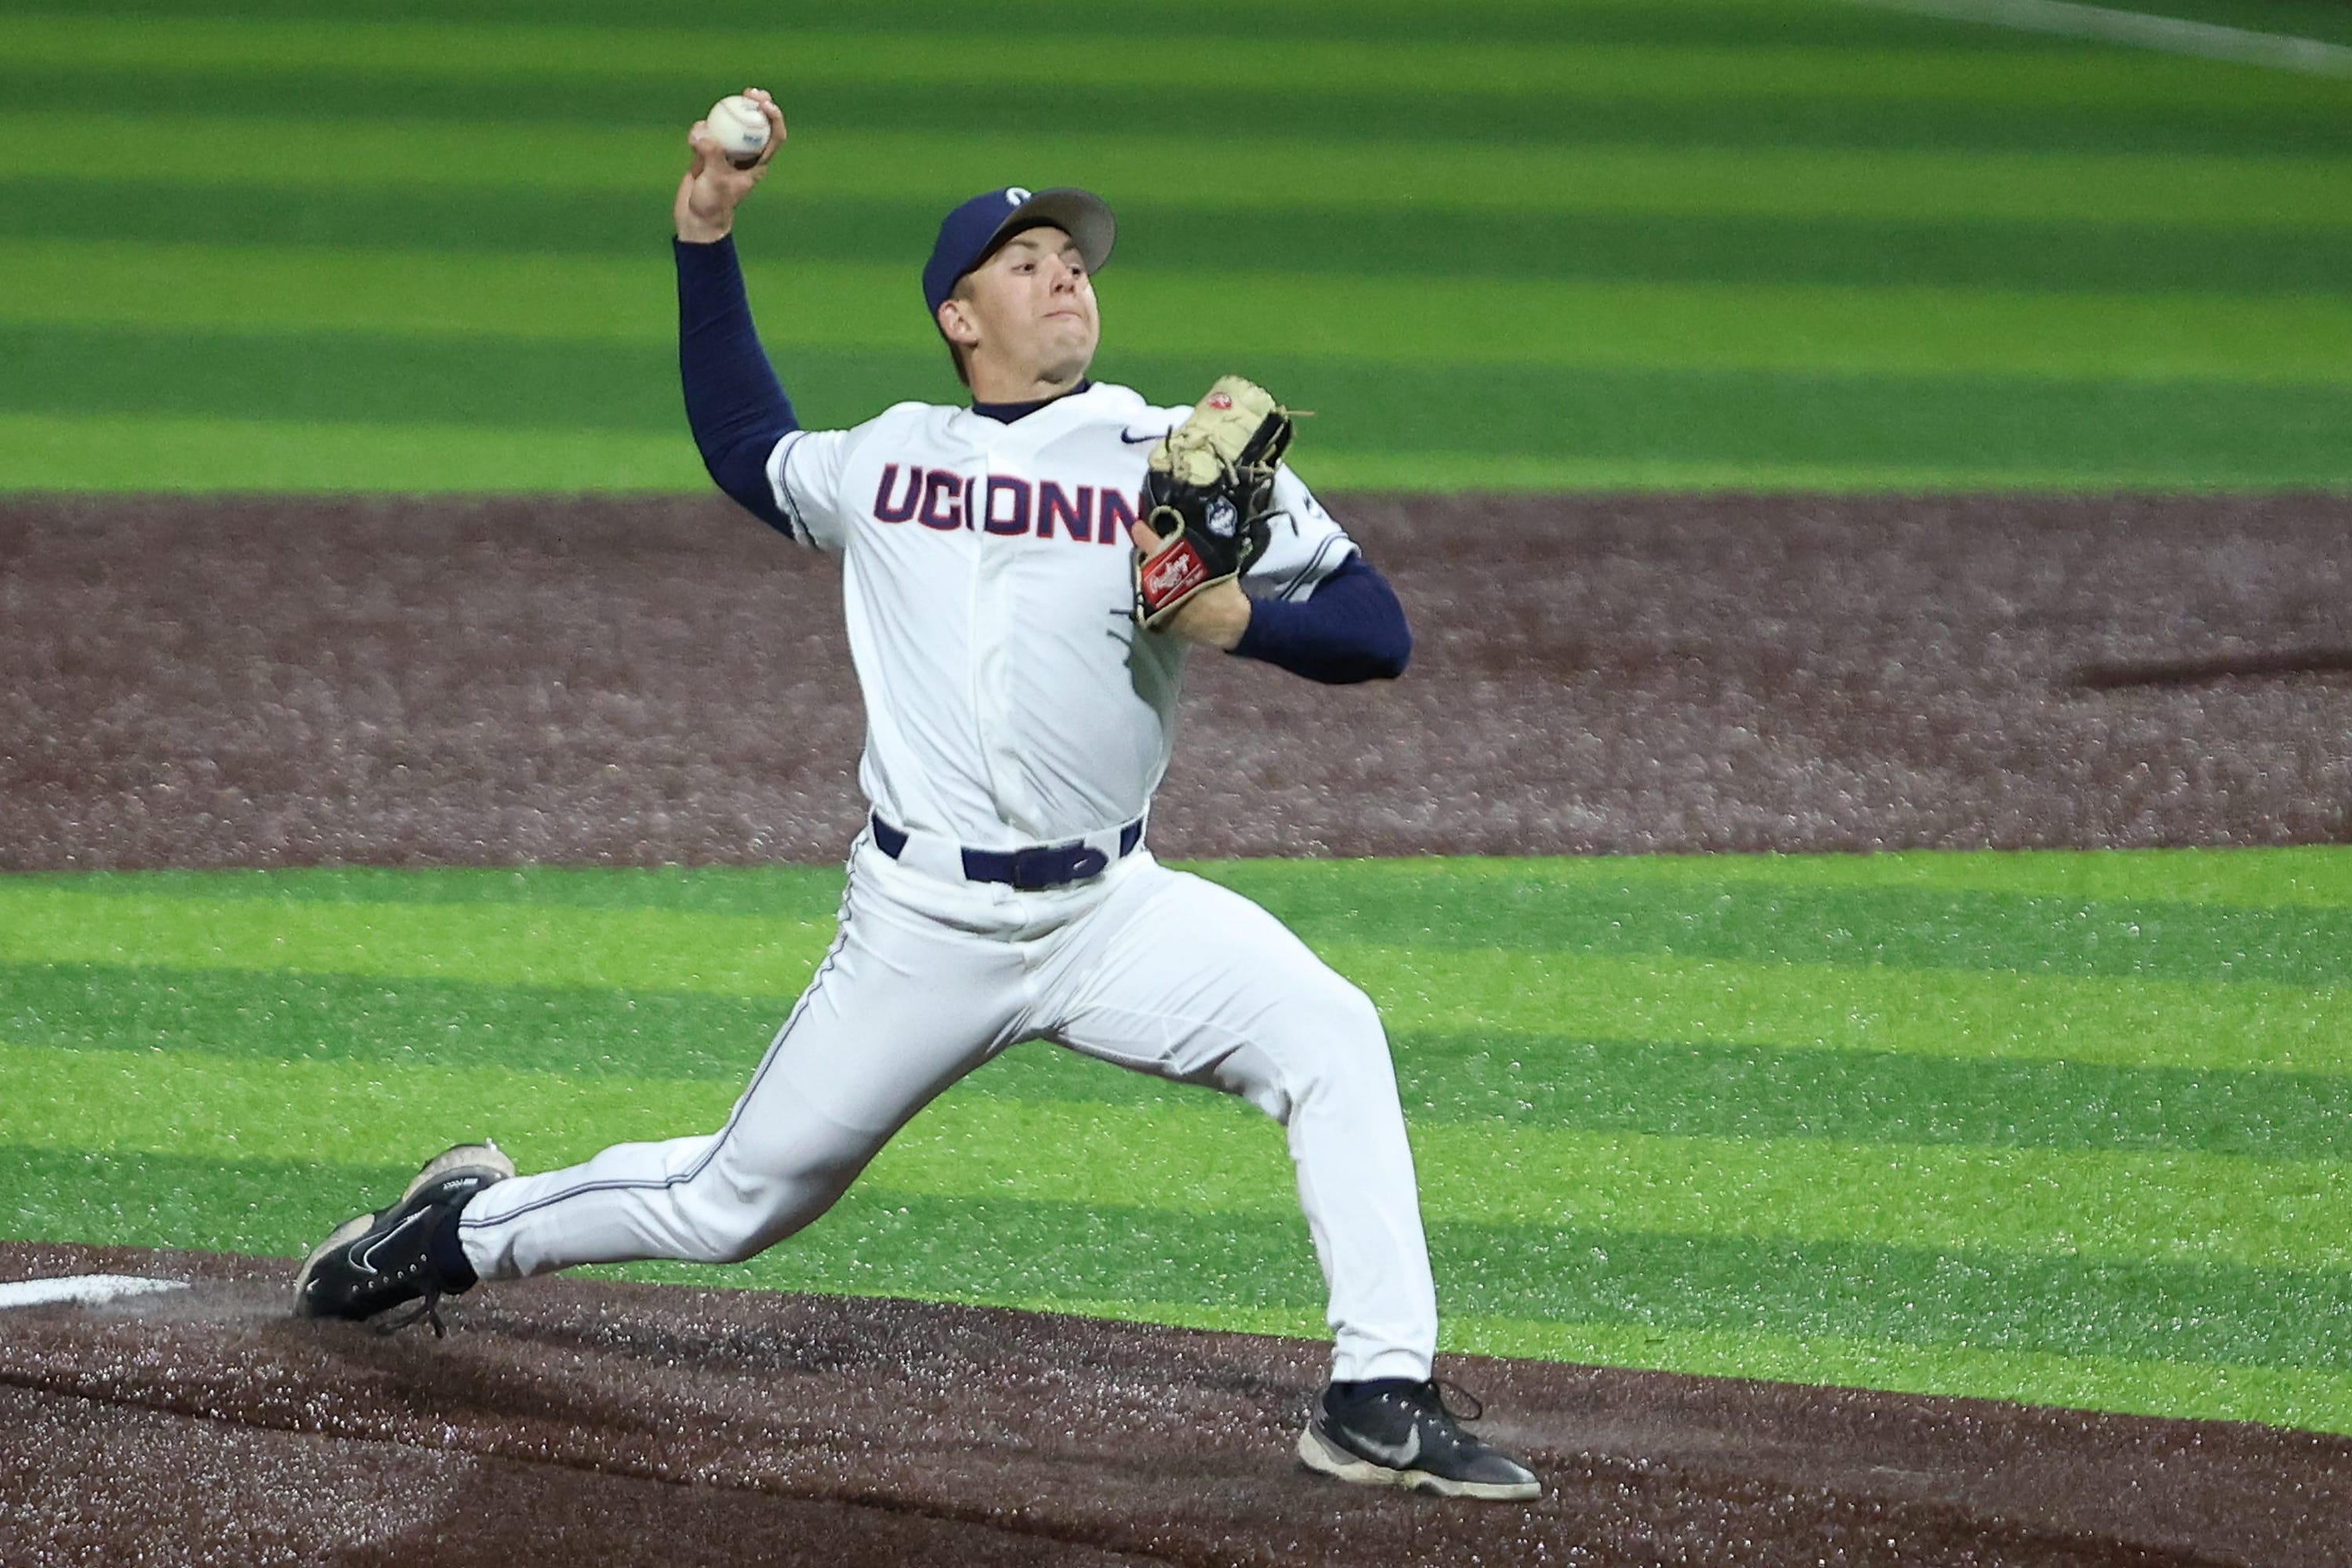 Four UConn baseball players who could make "the leap" in 2023